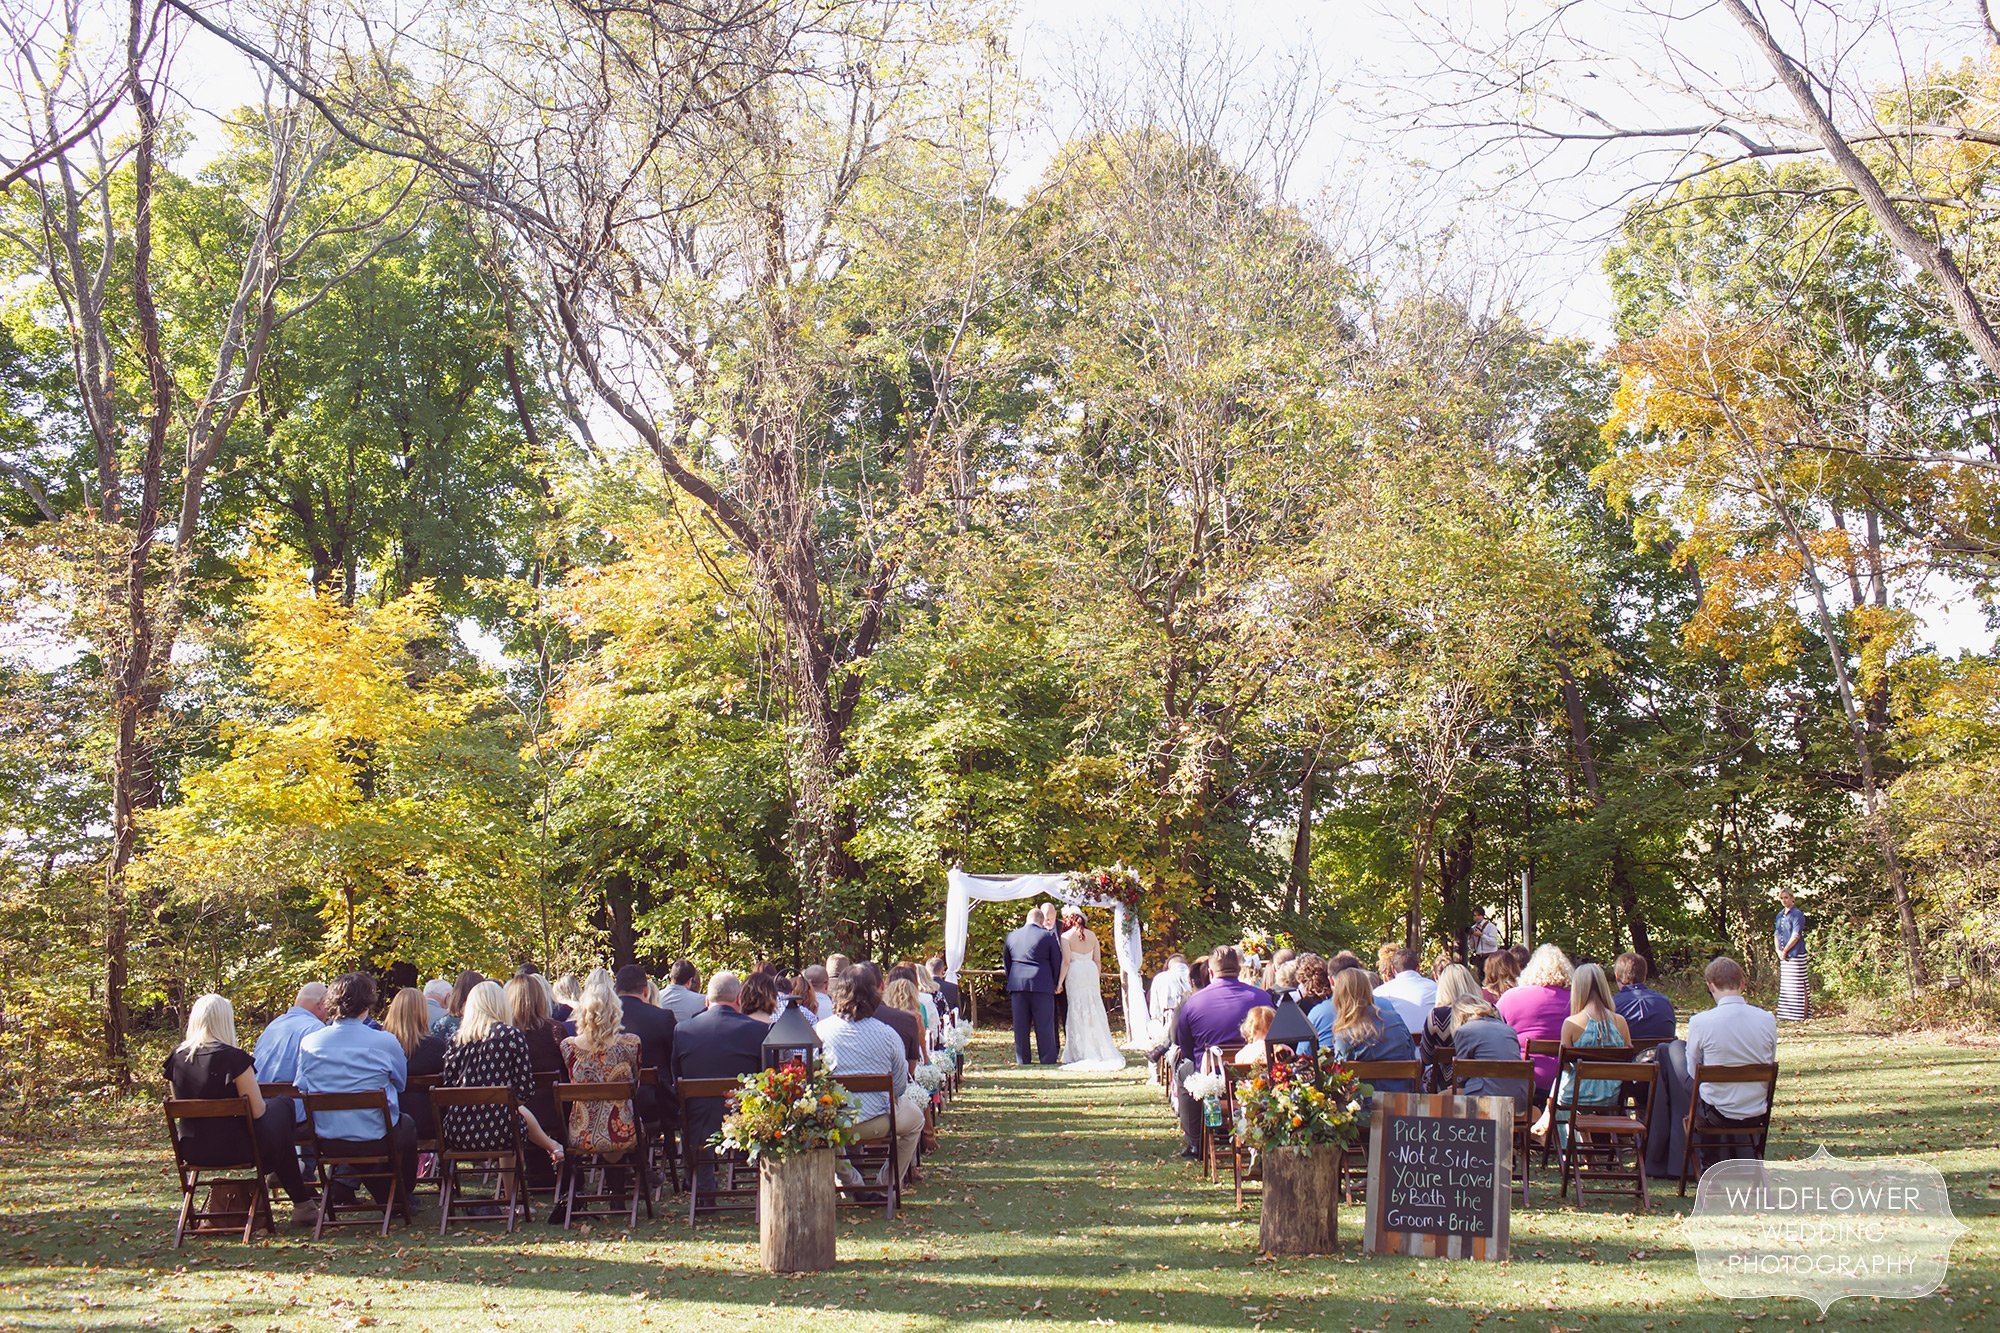 Overview image of the outdoor ceremony space at the Schwinn Produce Farm venue for an autumn October wedding.